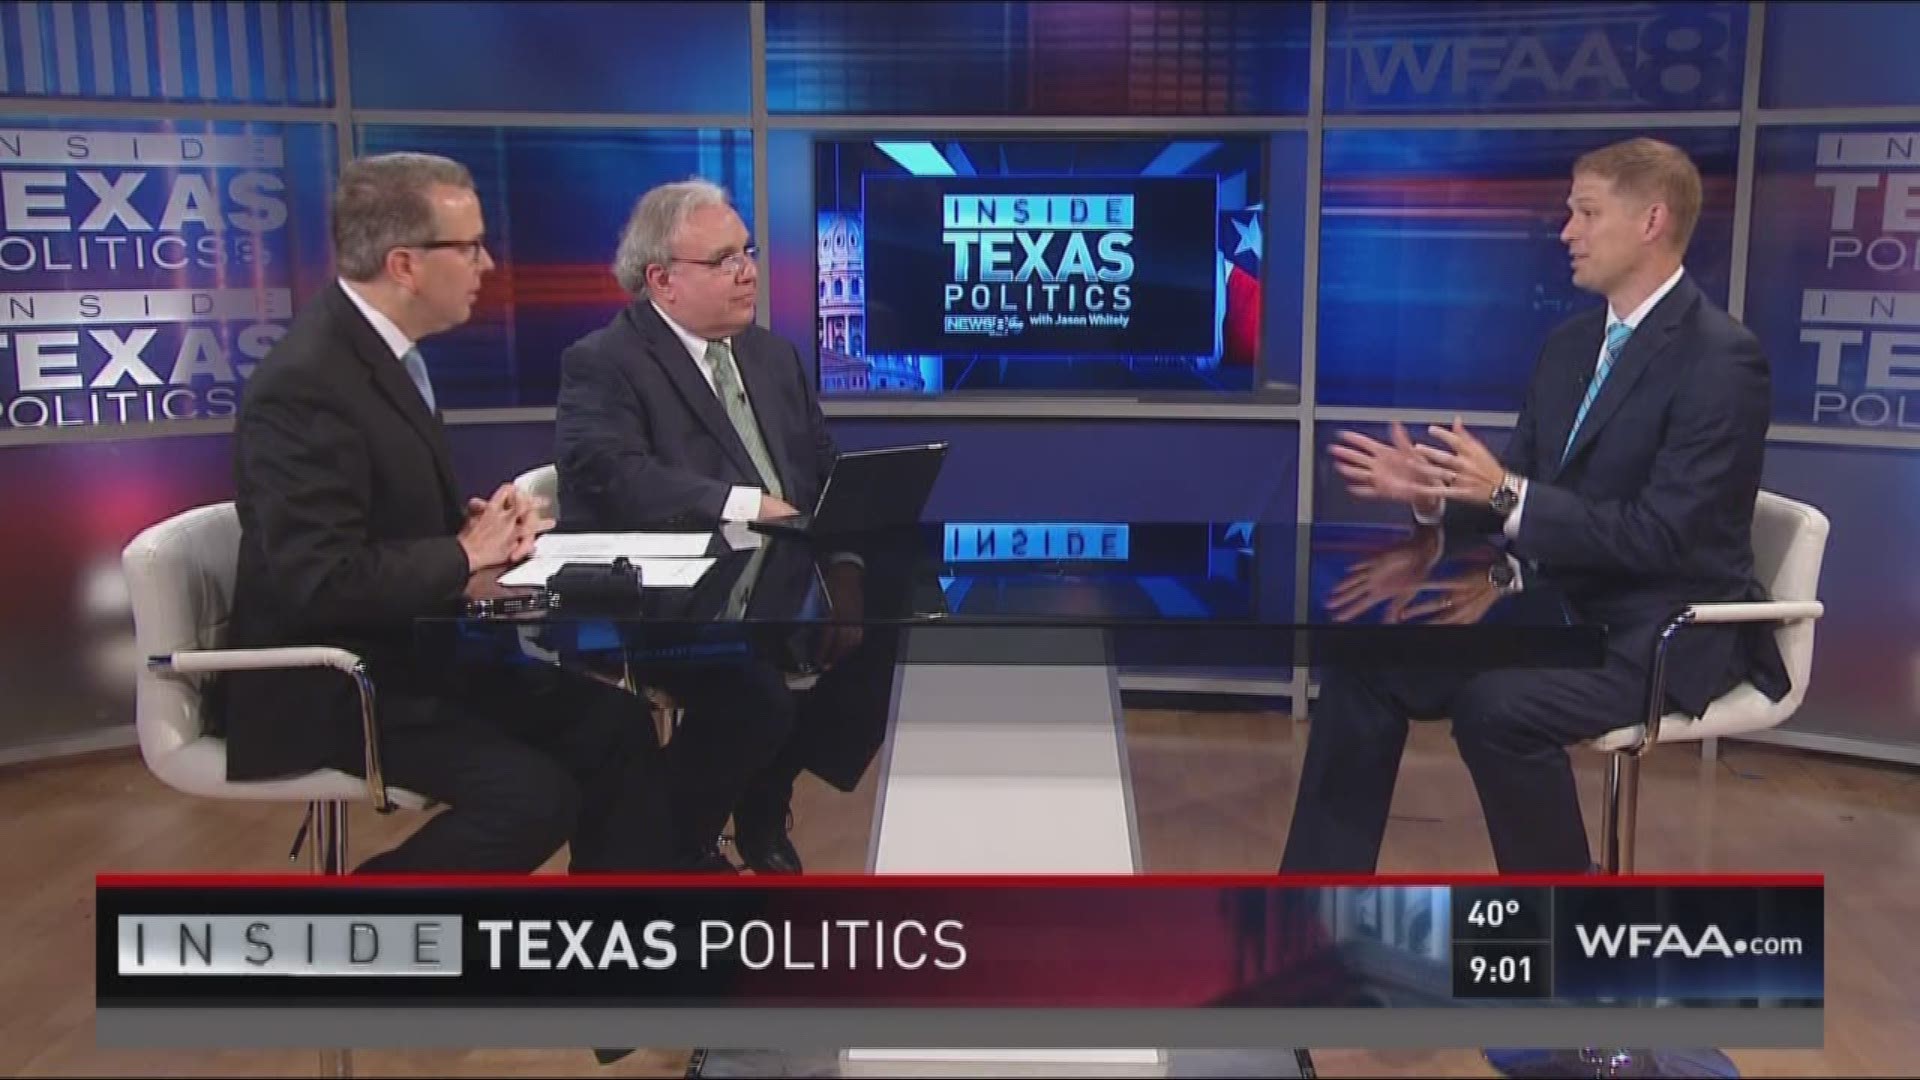 Republican State Rep. Matt Krause from Waco joined Inside Texas Politics to discuss both national and local politics. He did something Republicans rarely do - question President Donald Trump's actions. Rep. Krause claimed President Trump is going too far 